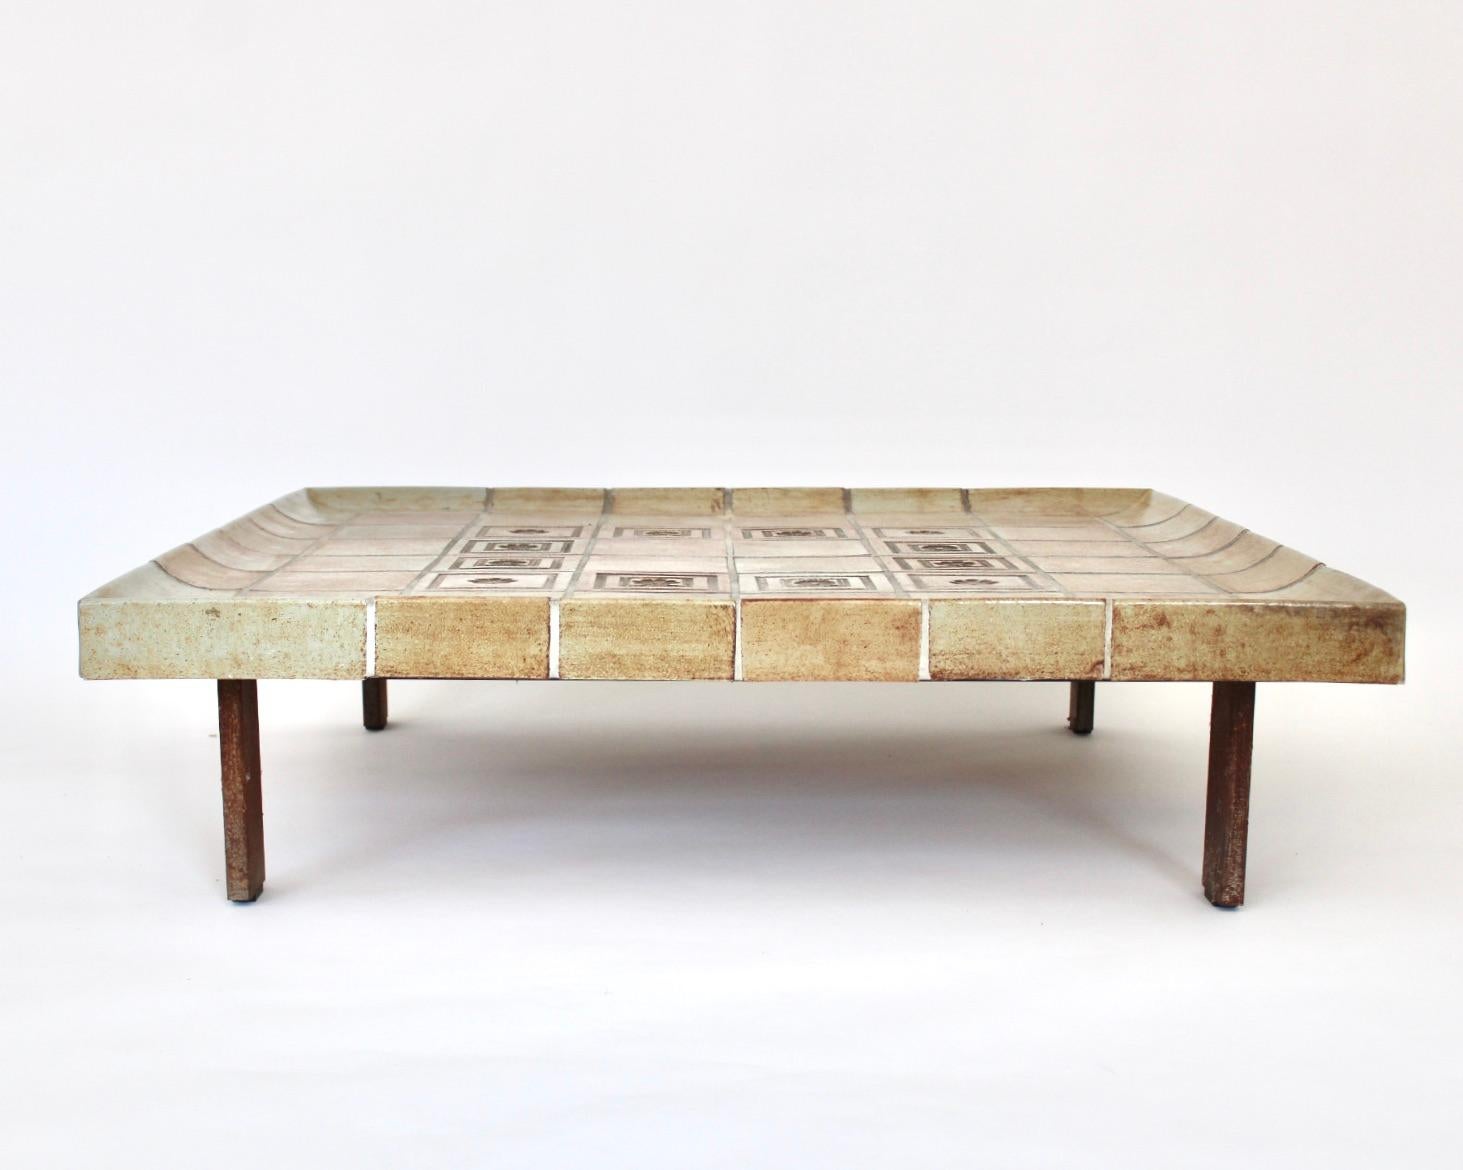 Roger Capron French ceramic tile coffee table model double size Cuvette. 
This table is composed of tiles that each exhibit the strong influence of the fire in the kiln and vary in colors of warm light browns and tan. The center tiles have